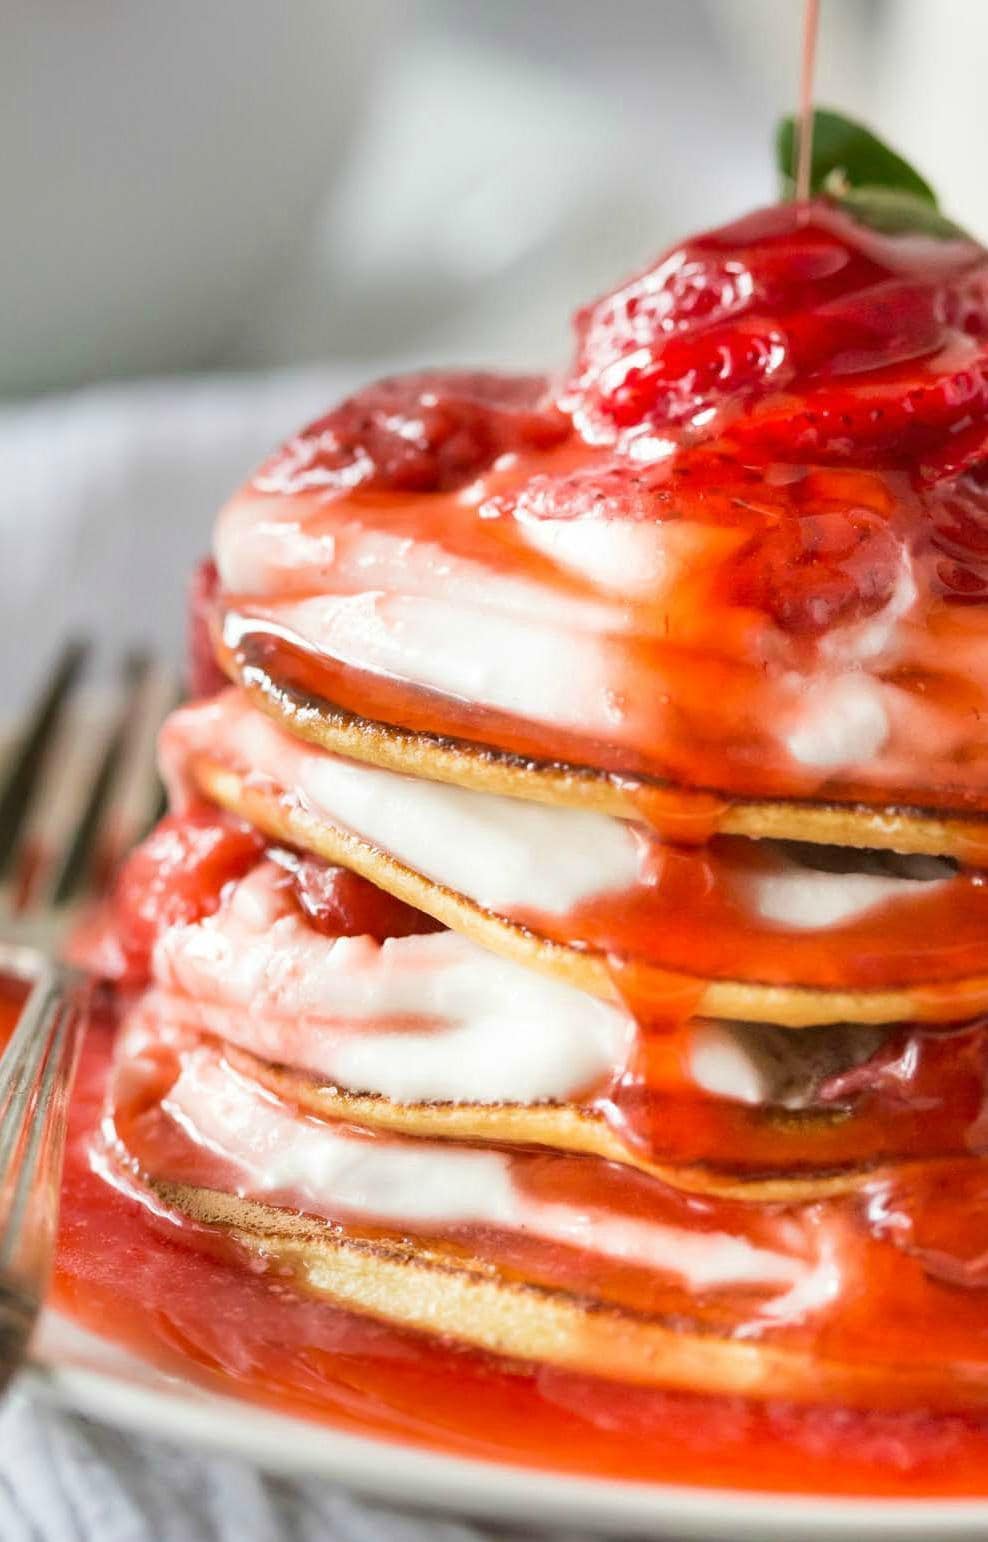 Delicious Low Carb Paleo Crepes with Strawberry sauce and Coconut Whipped Cream made in 15 minutes! Dairy Free, Gluten Free, Paleo and Grain Free.